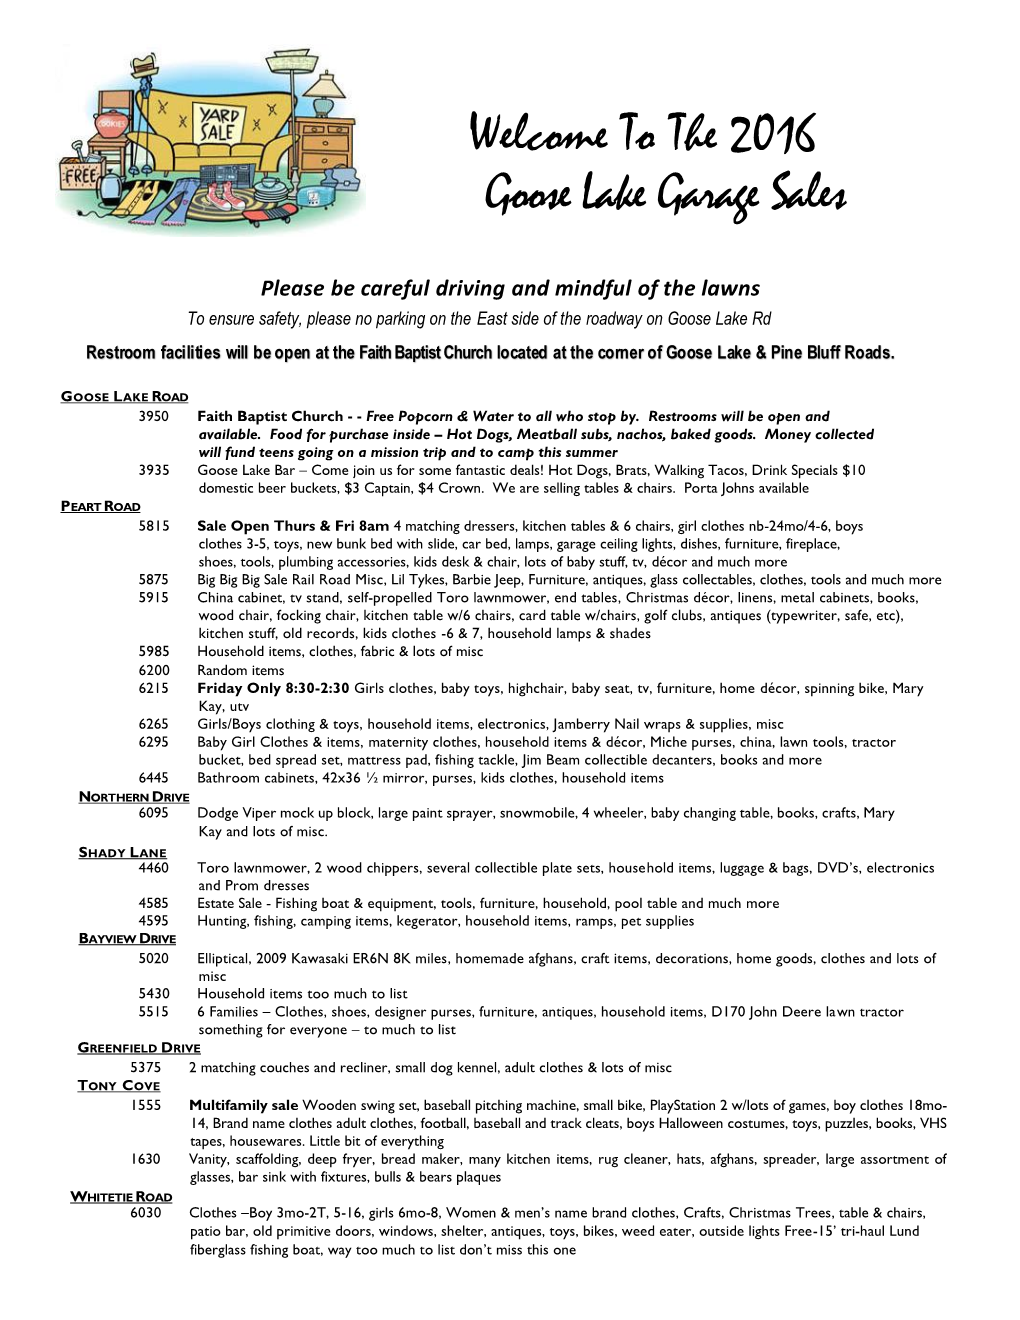 Welcome to the 2016 Goose Lake Garage Sales